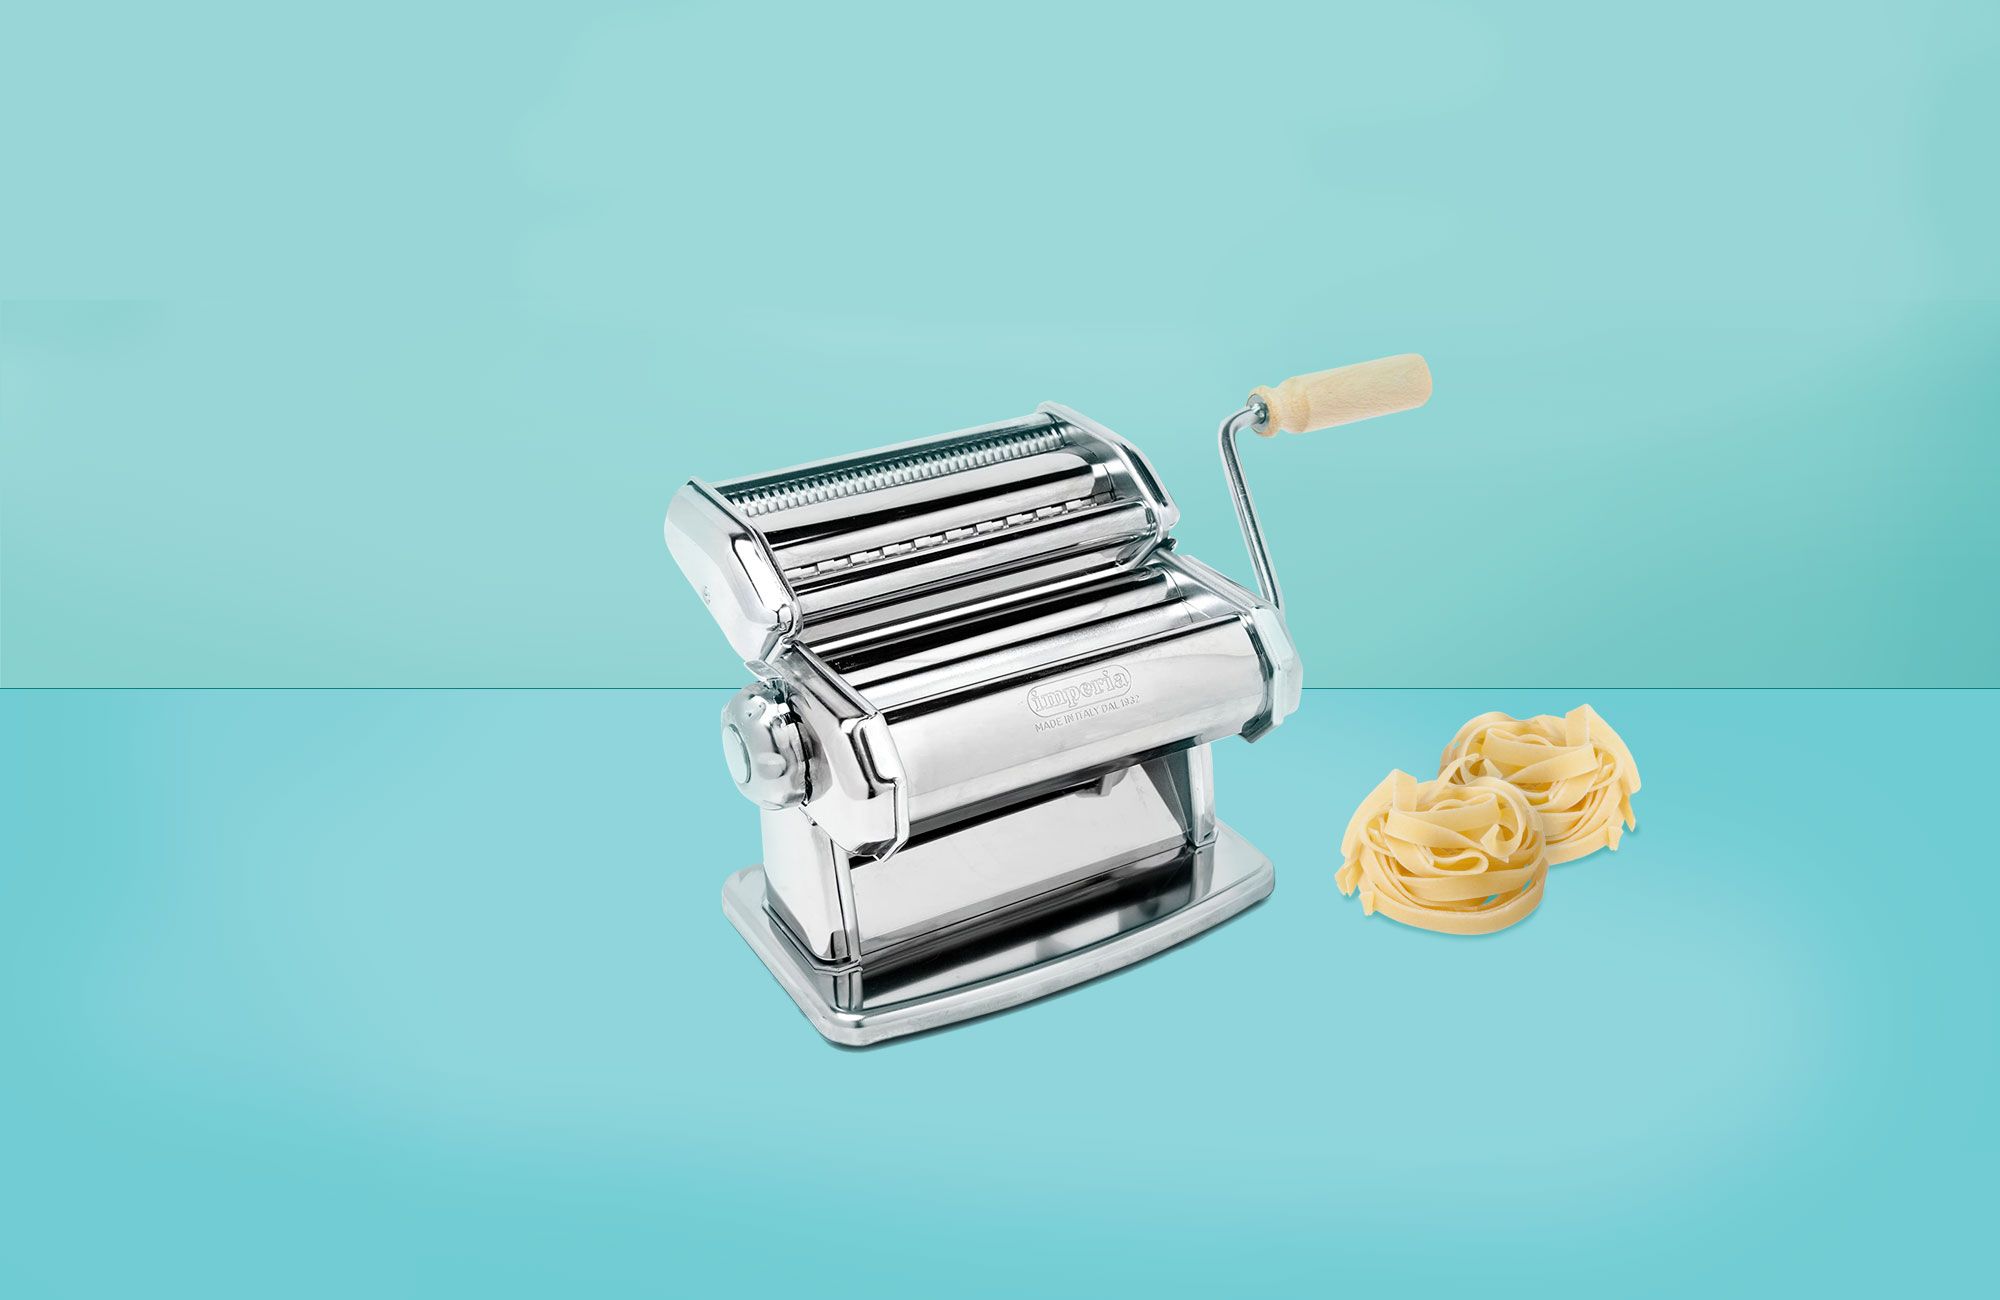 CNCEST Pasta Maker Stainless Steel Electric Pasta Machine Noodle Maker Noodle Press Machine Pasta Roller Machine 